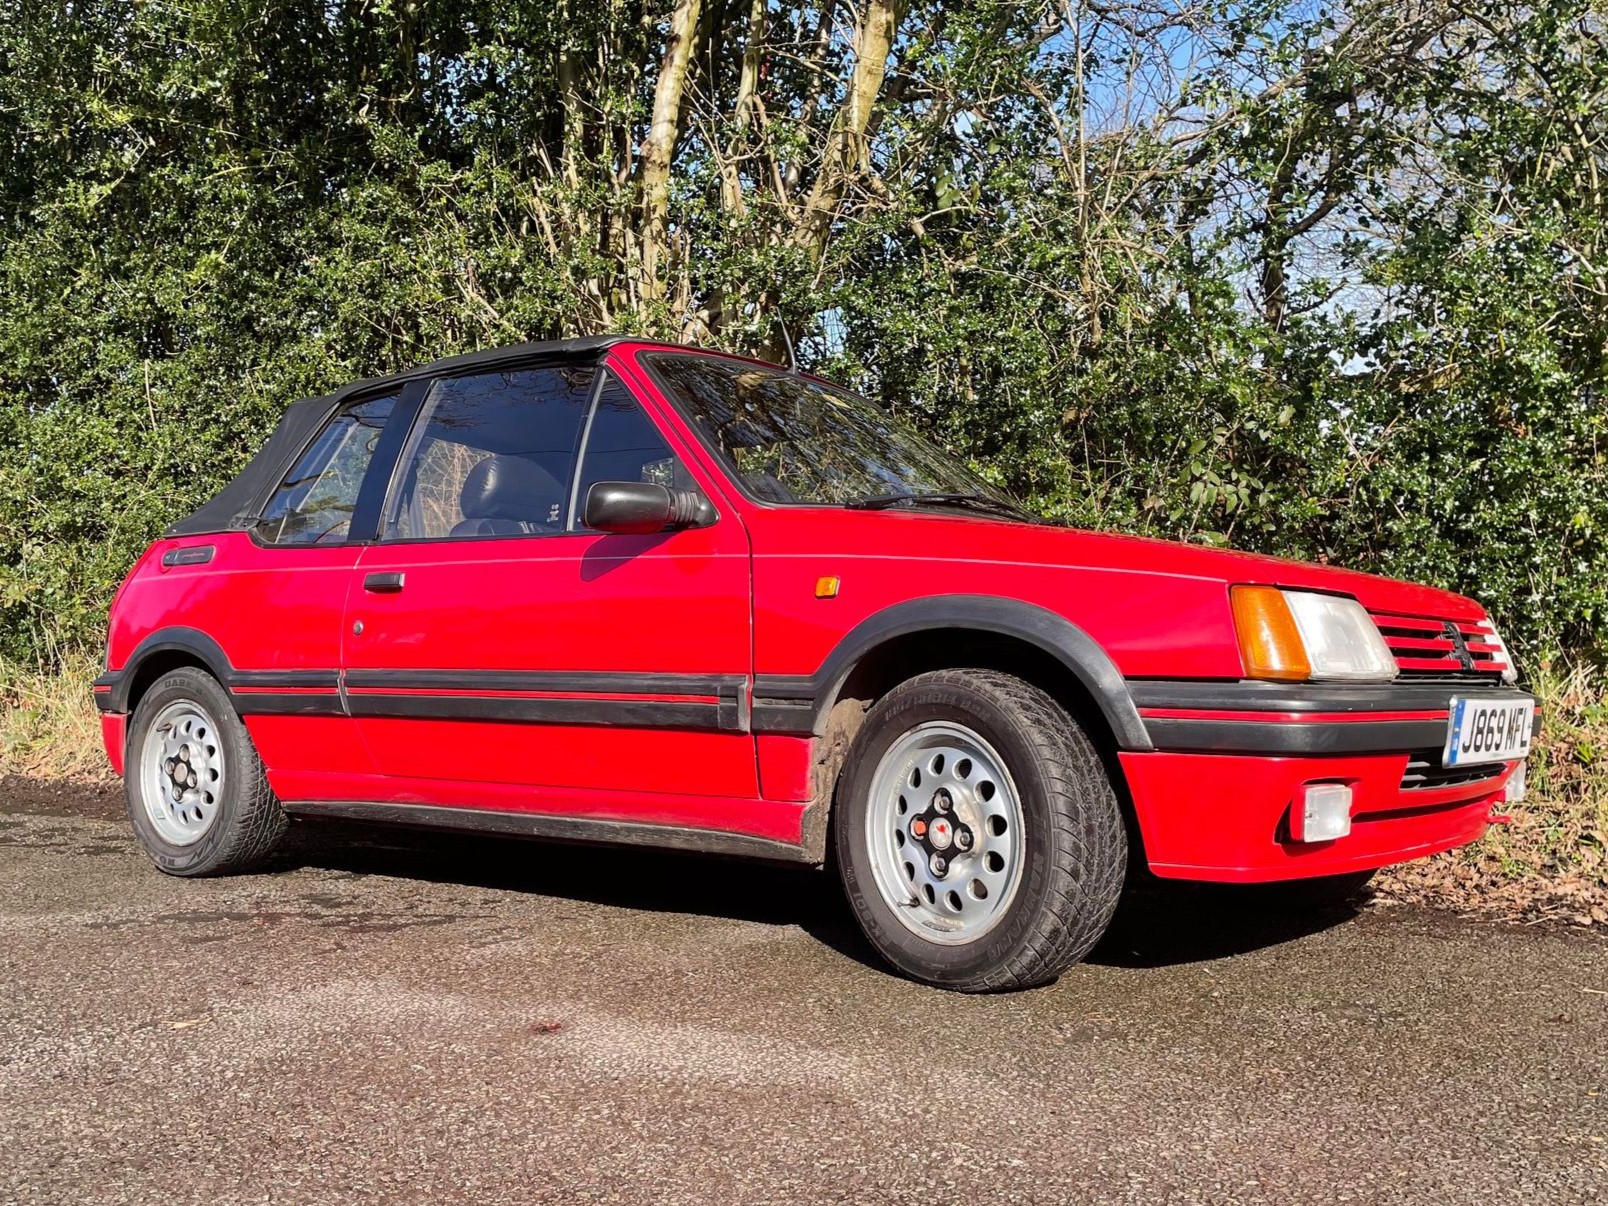 Peugeot 205 Cti 1.6 convertible - Mot'd 83,000 miles This stunning low mileage car has been - Image 2 of 18